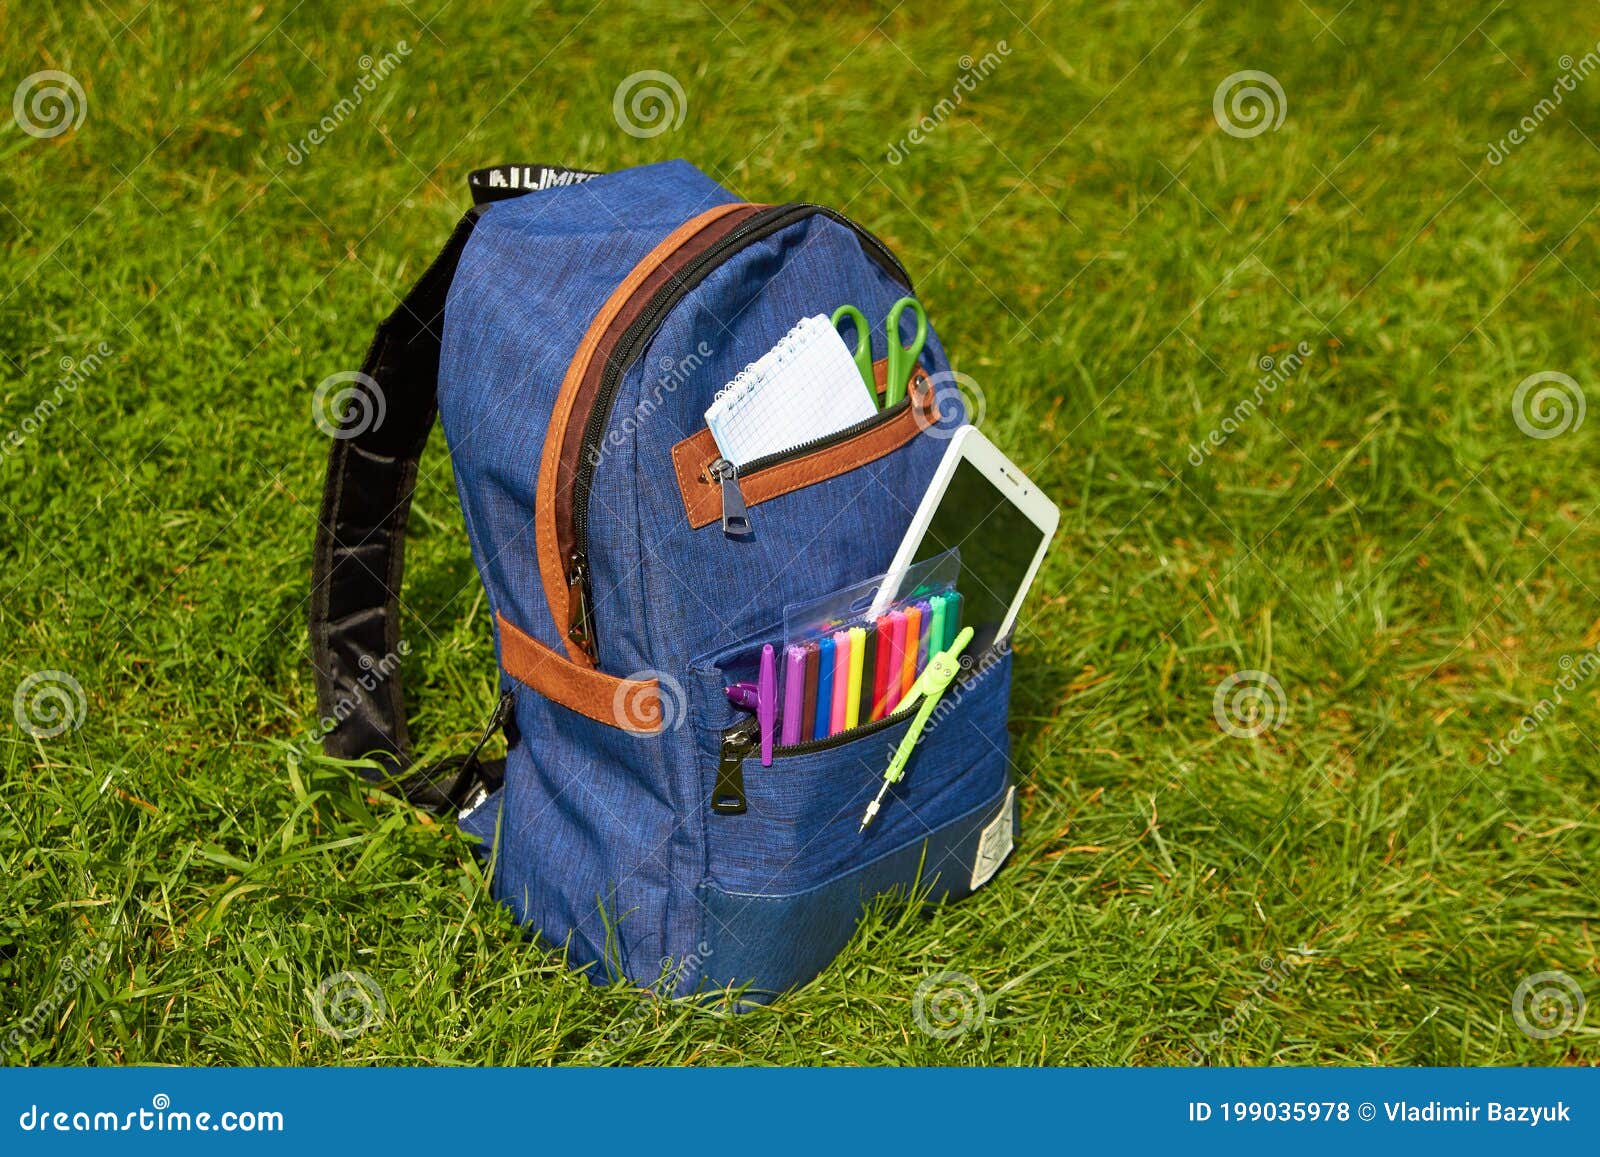 Blue School Bag on the Grass,on the Grass for a Teenager a School ...